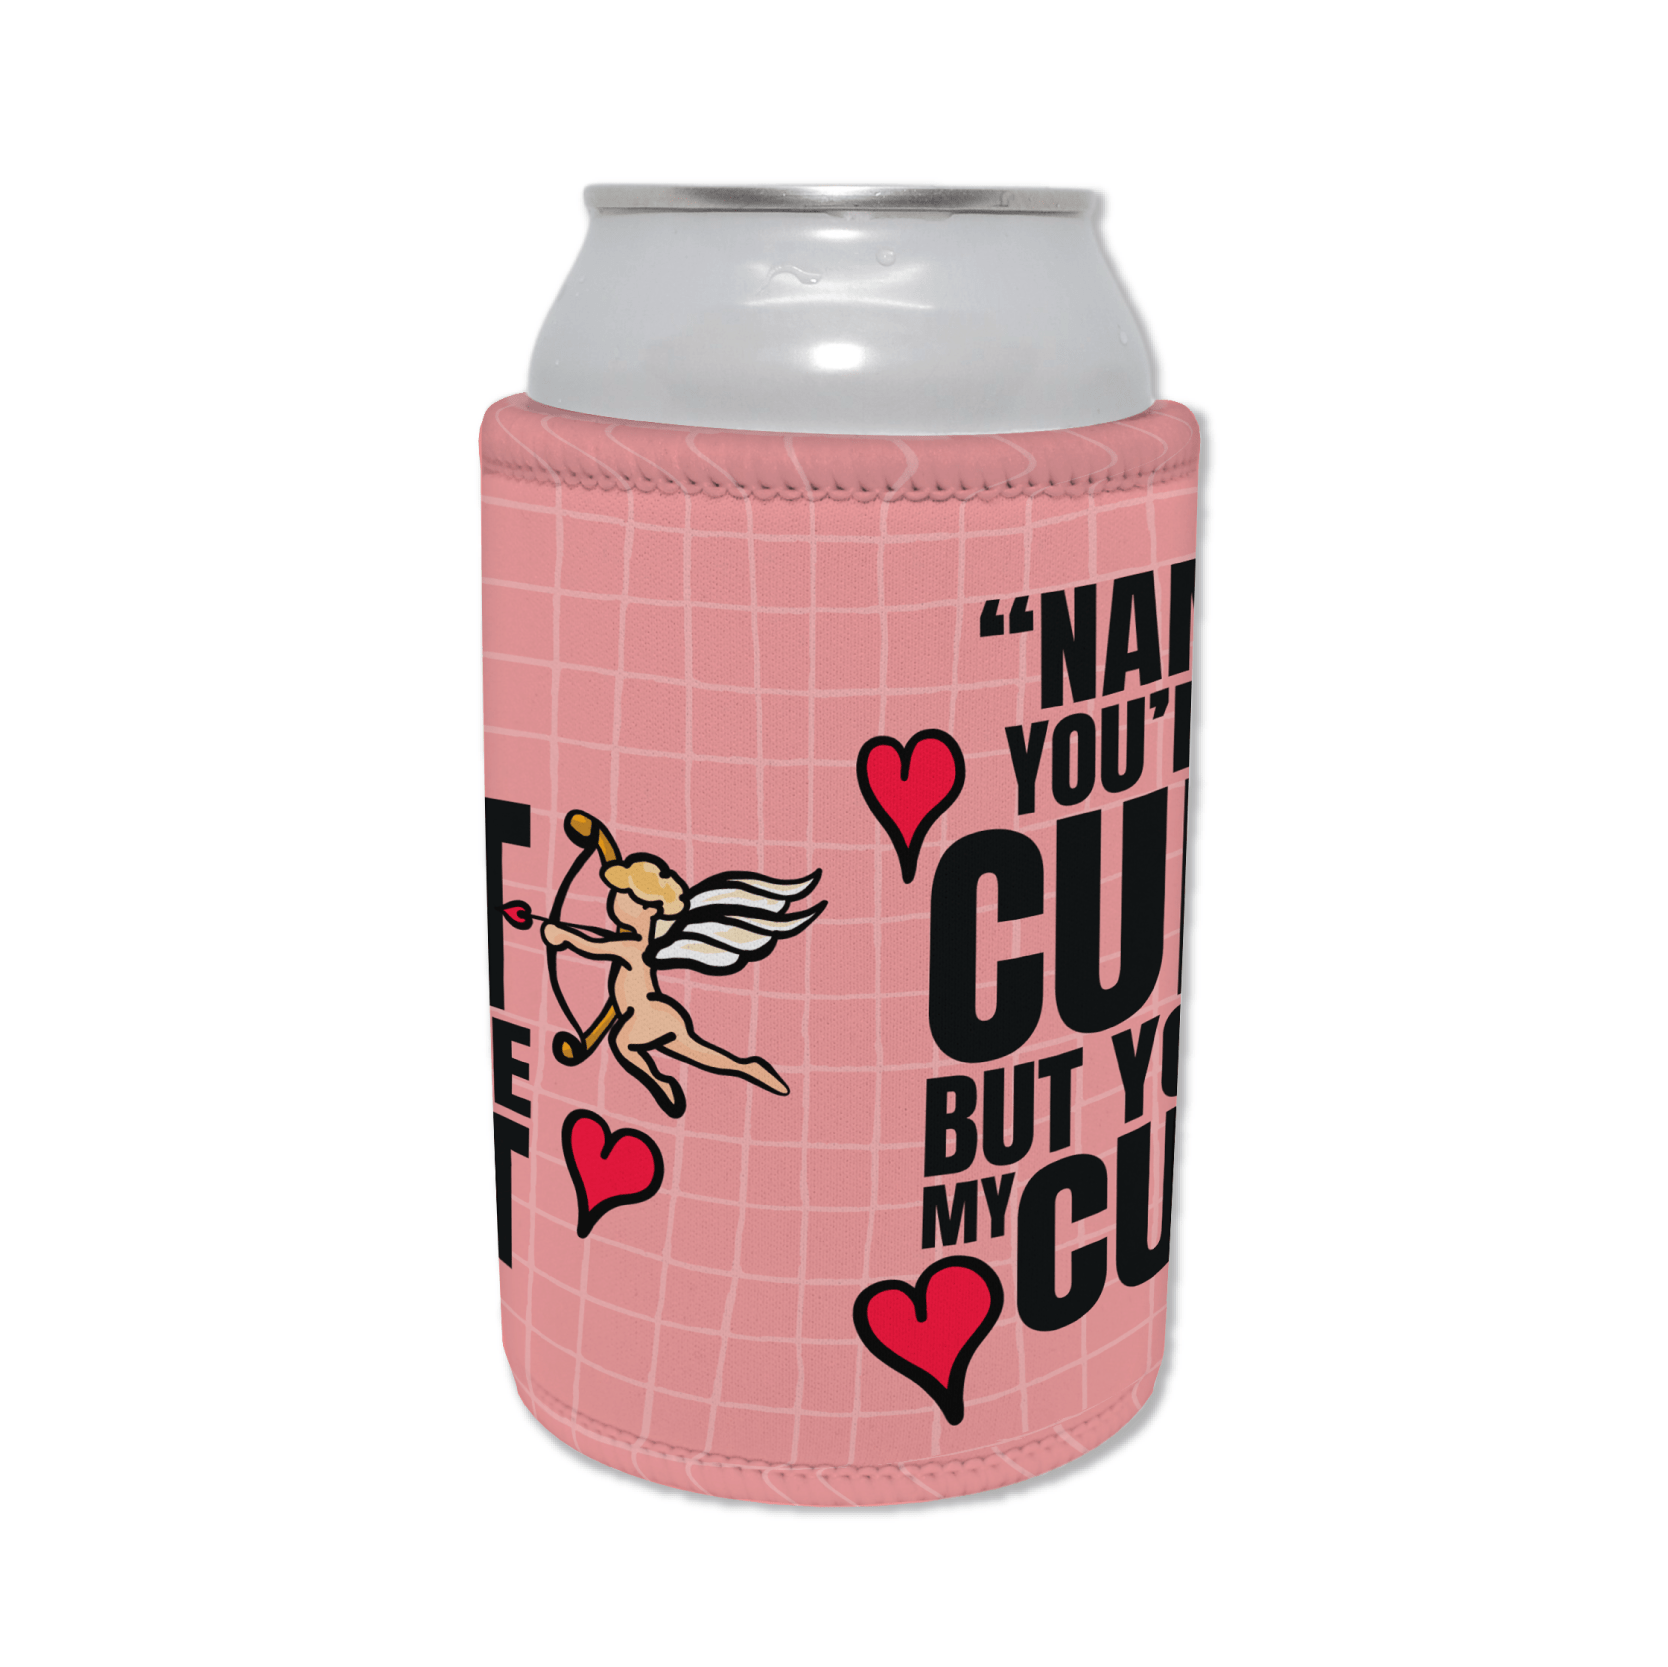 But you're mine 🥰 - Personalised Stubby Holder